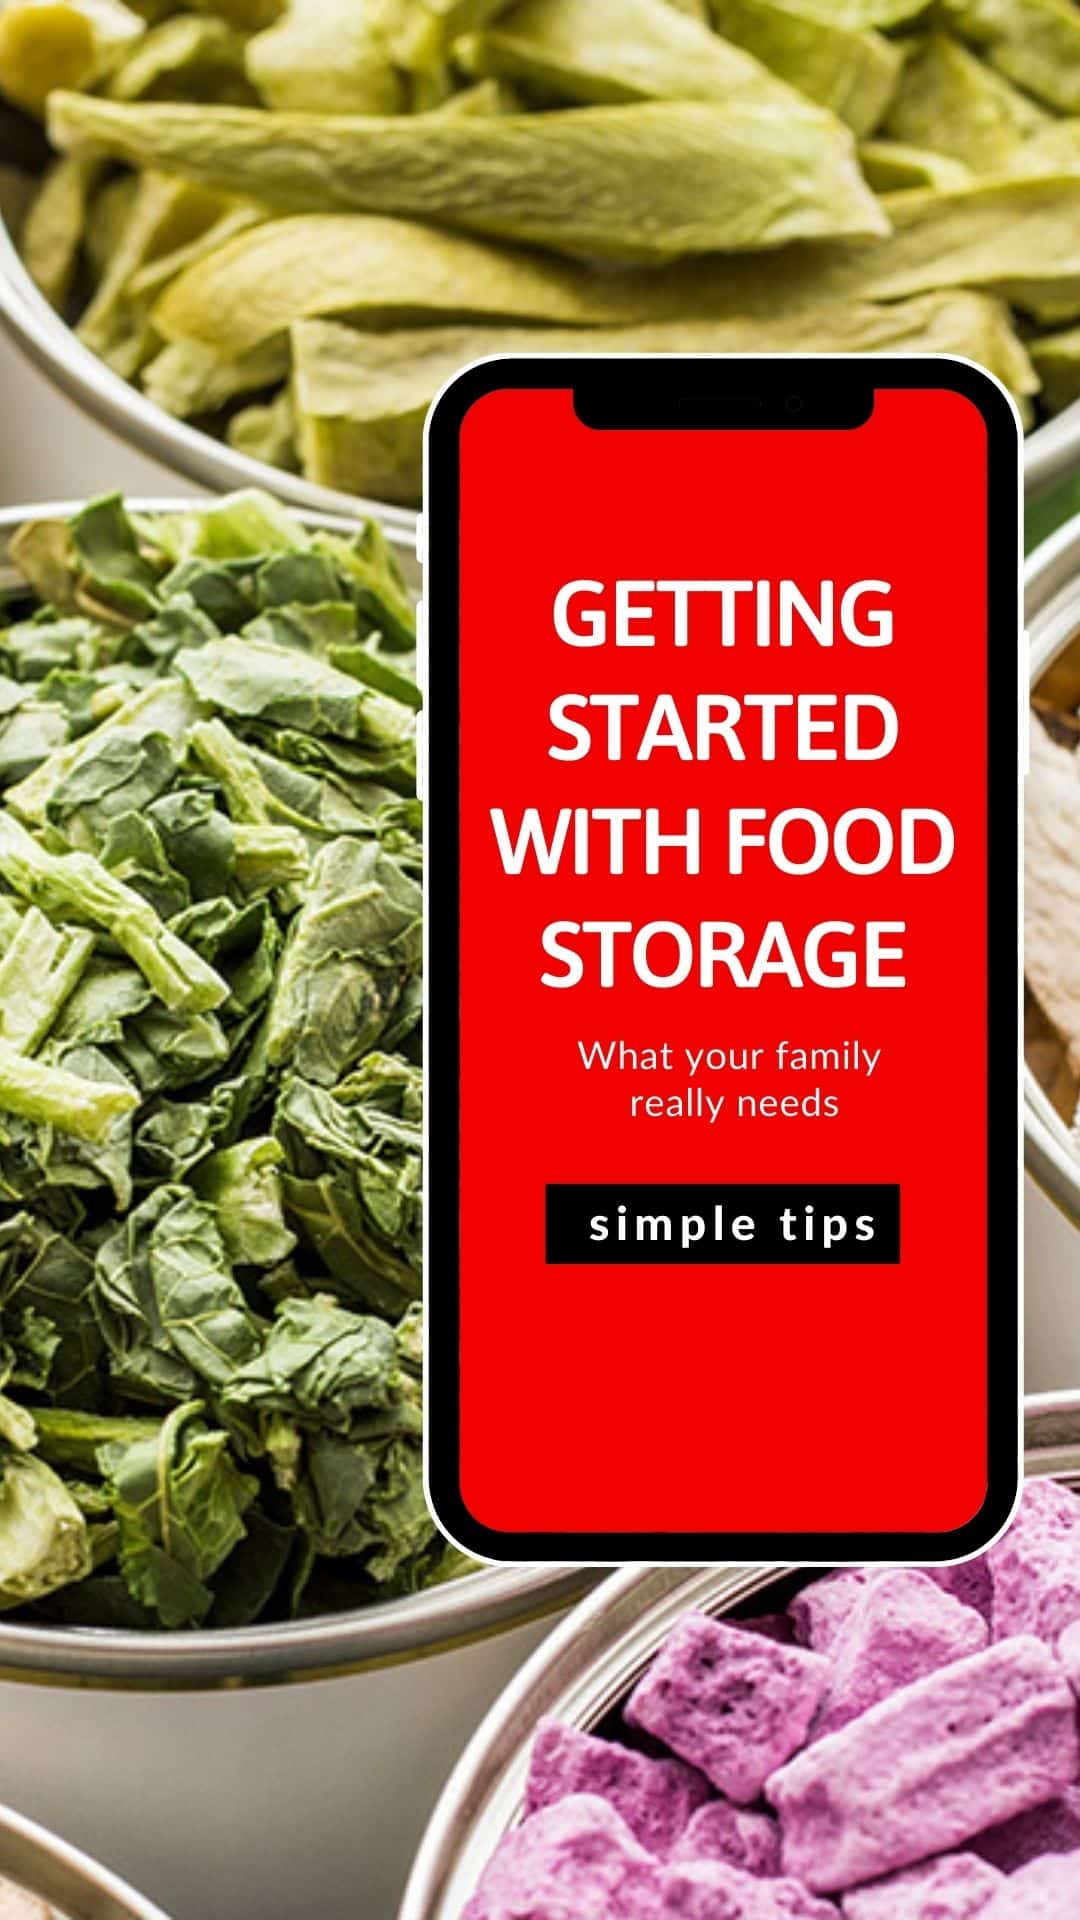 Short-Term Food Storage Basics: Part 2 - How Much Food do You Use?